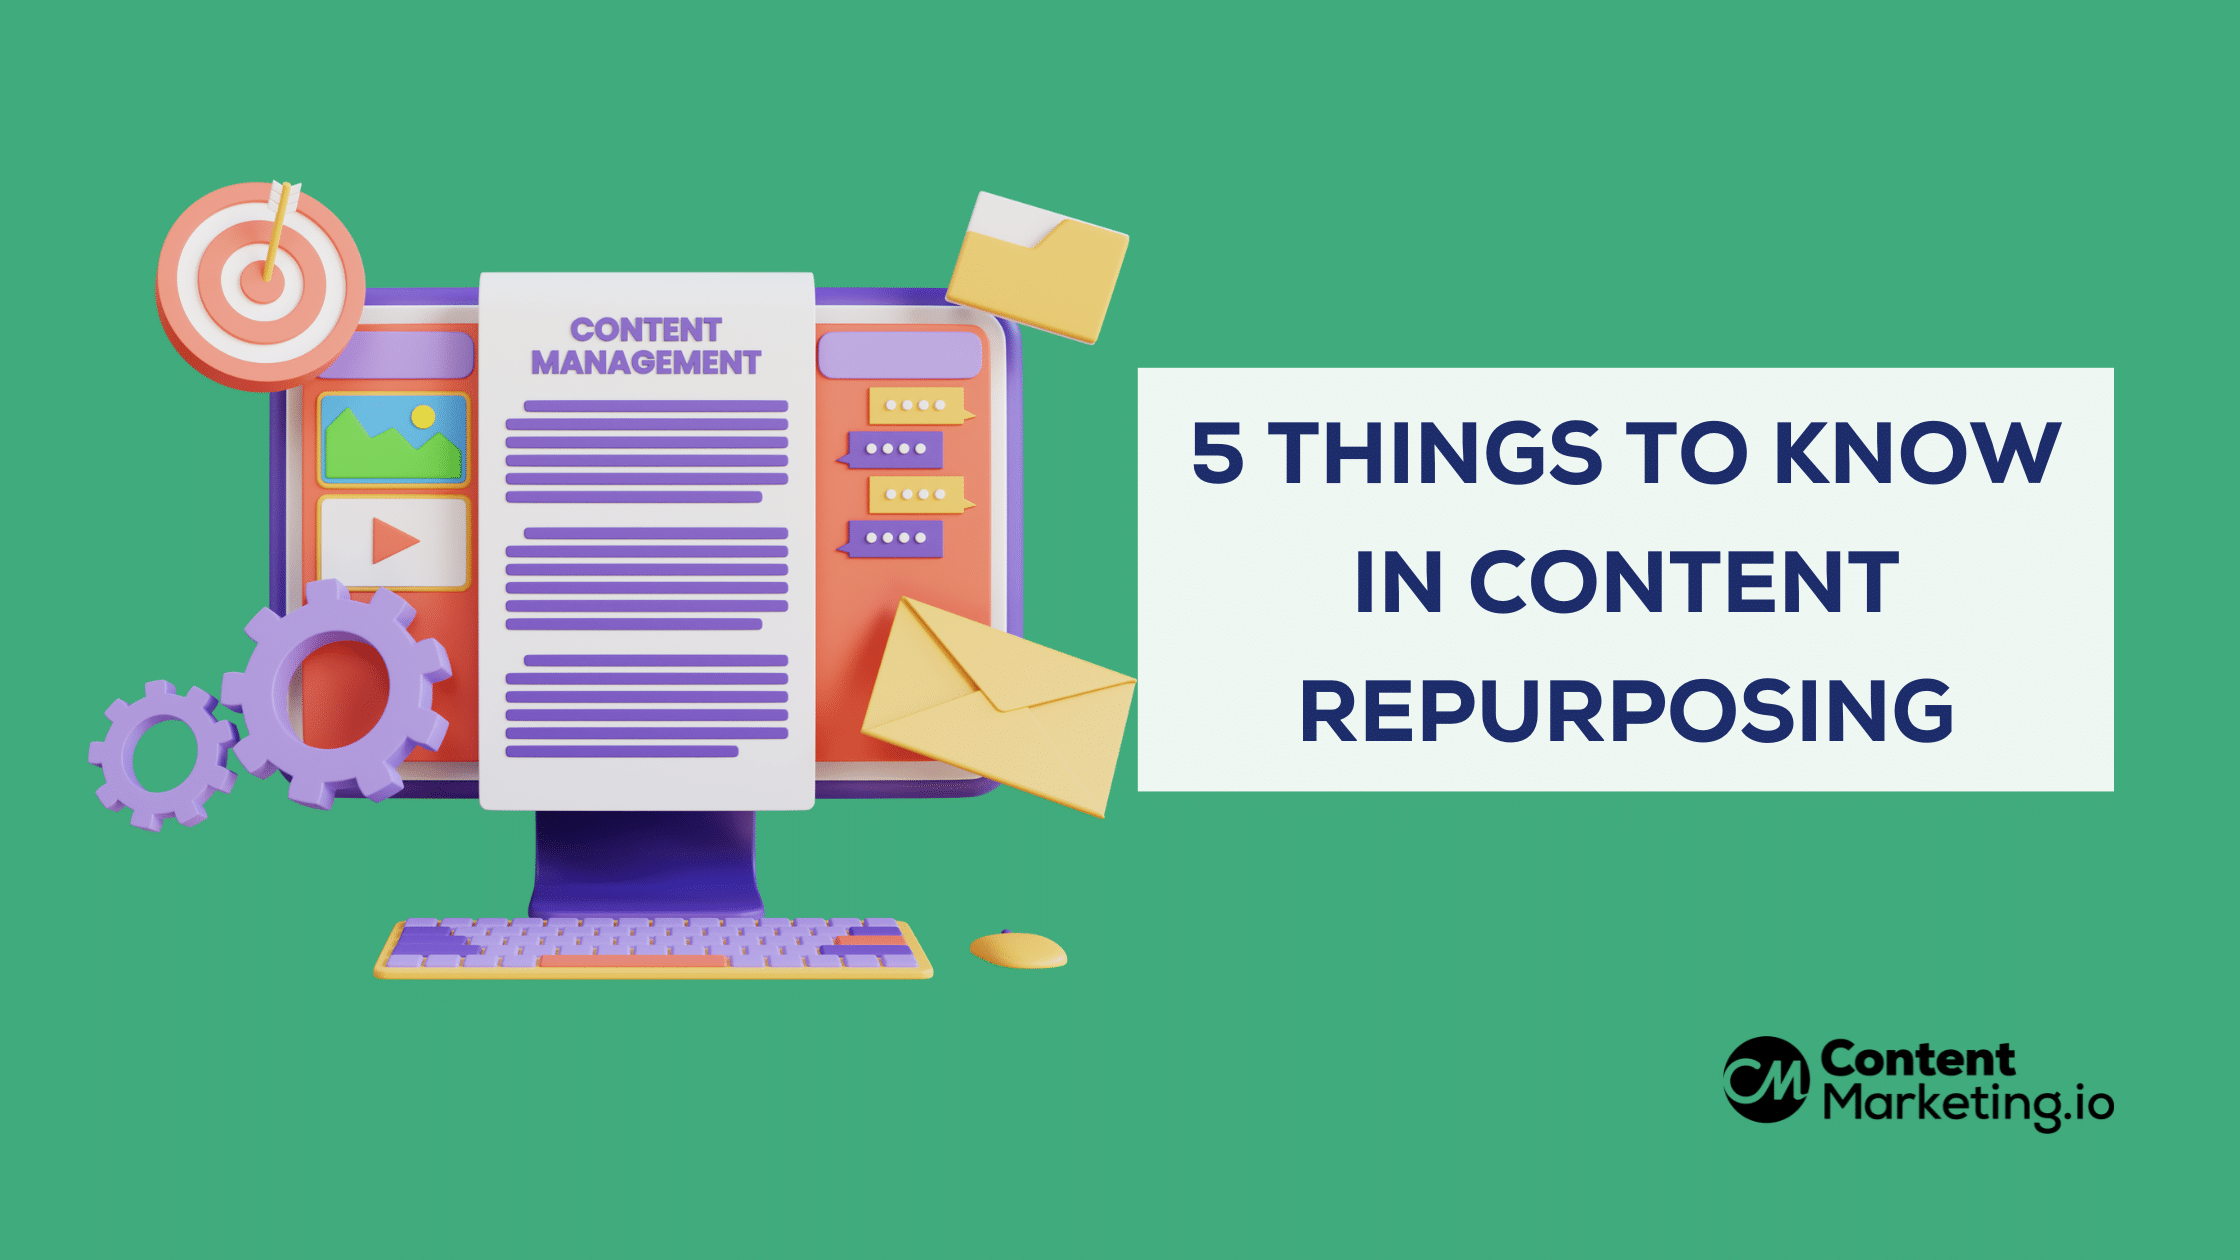 5 Things to Know in Content Repurposing